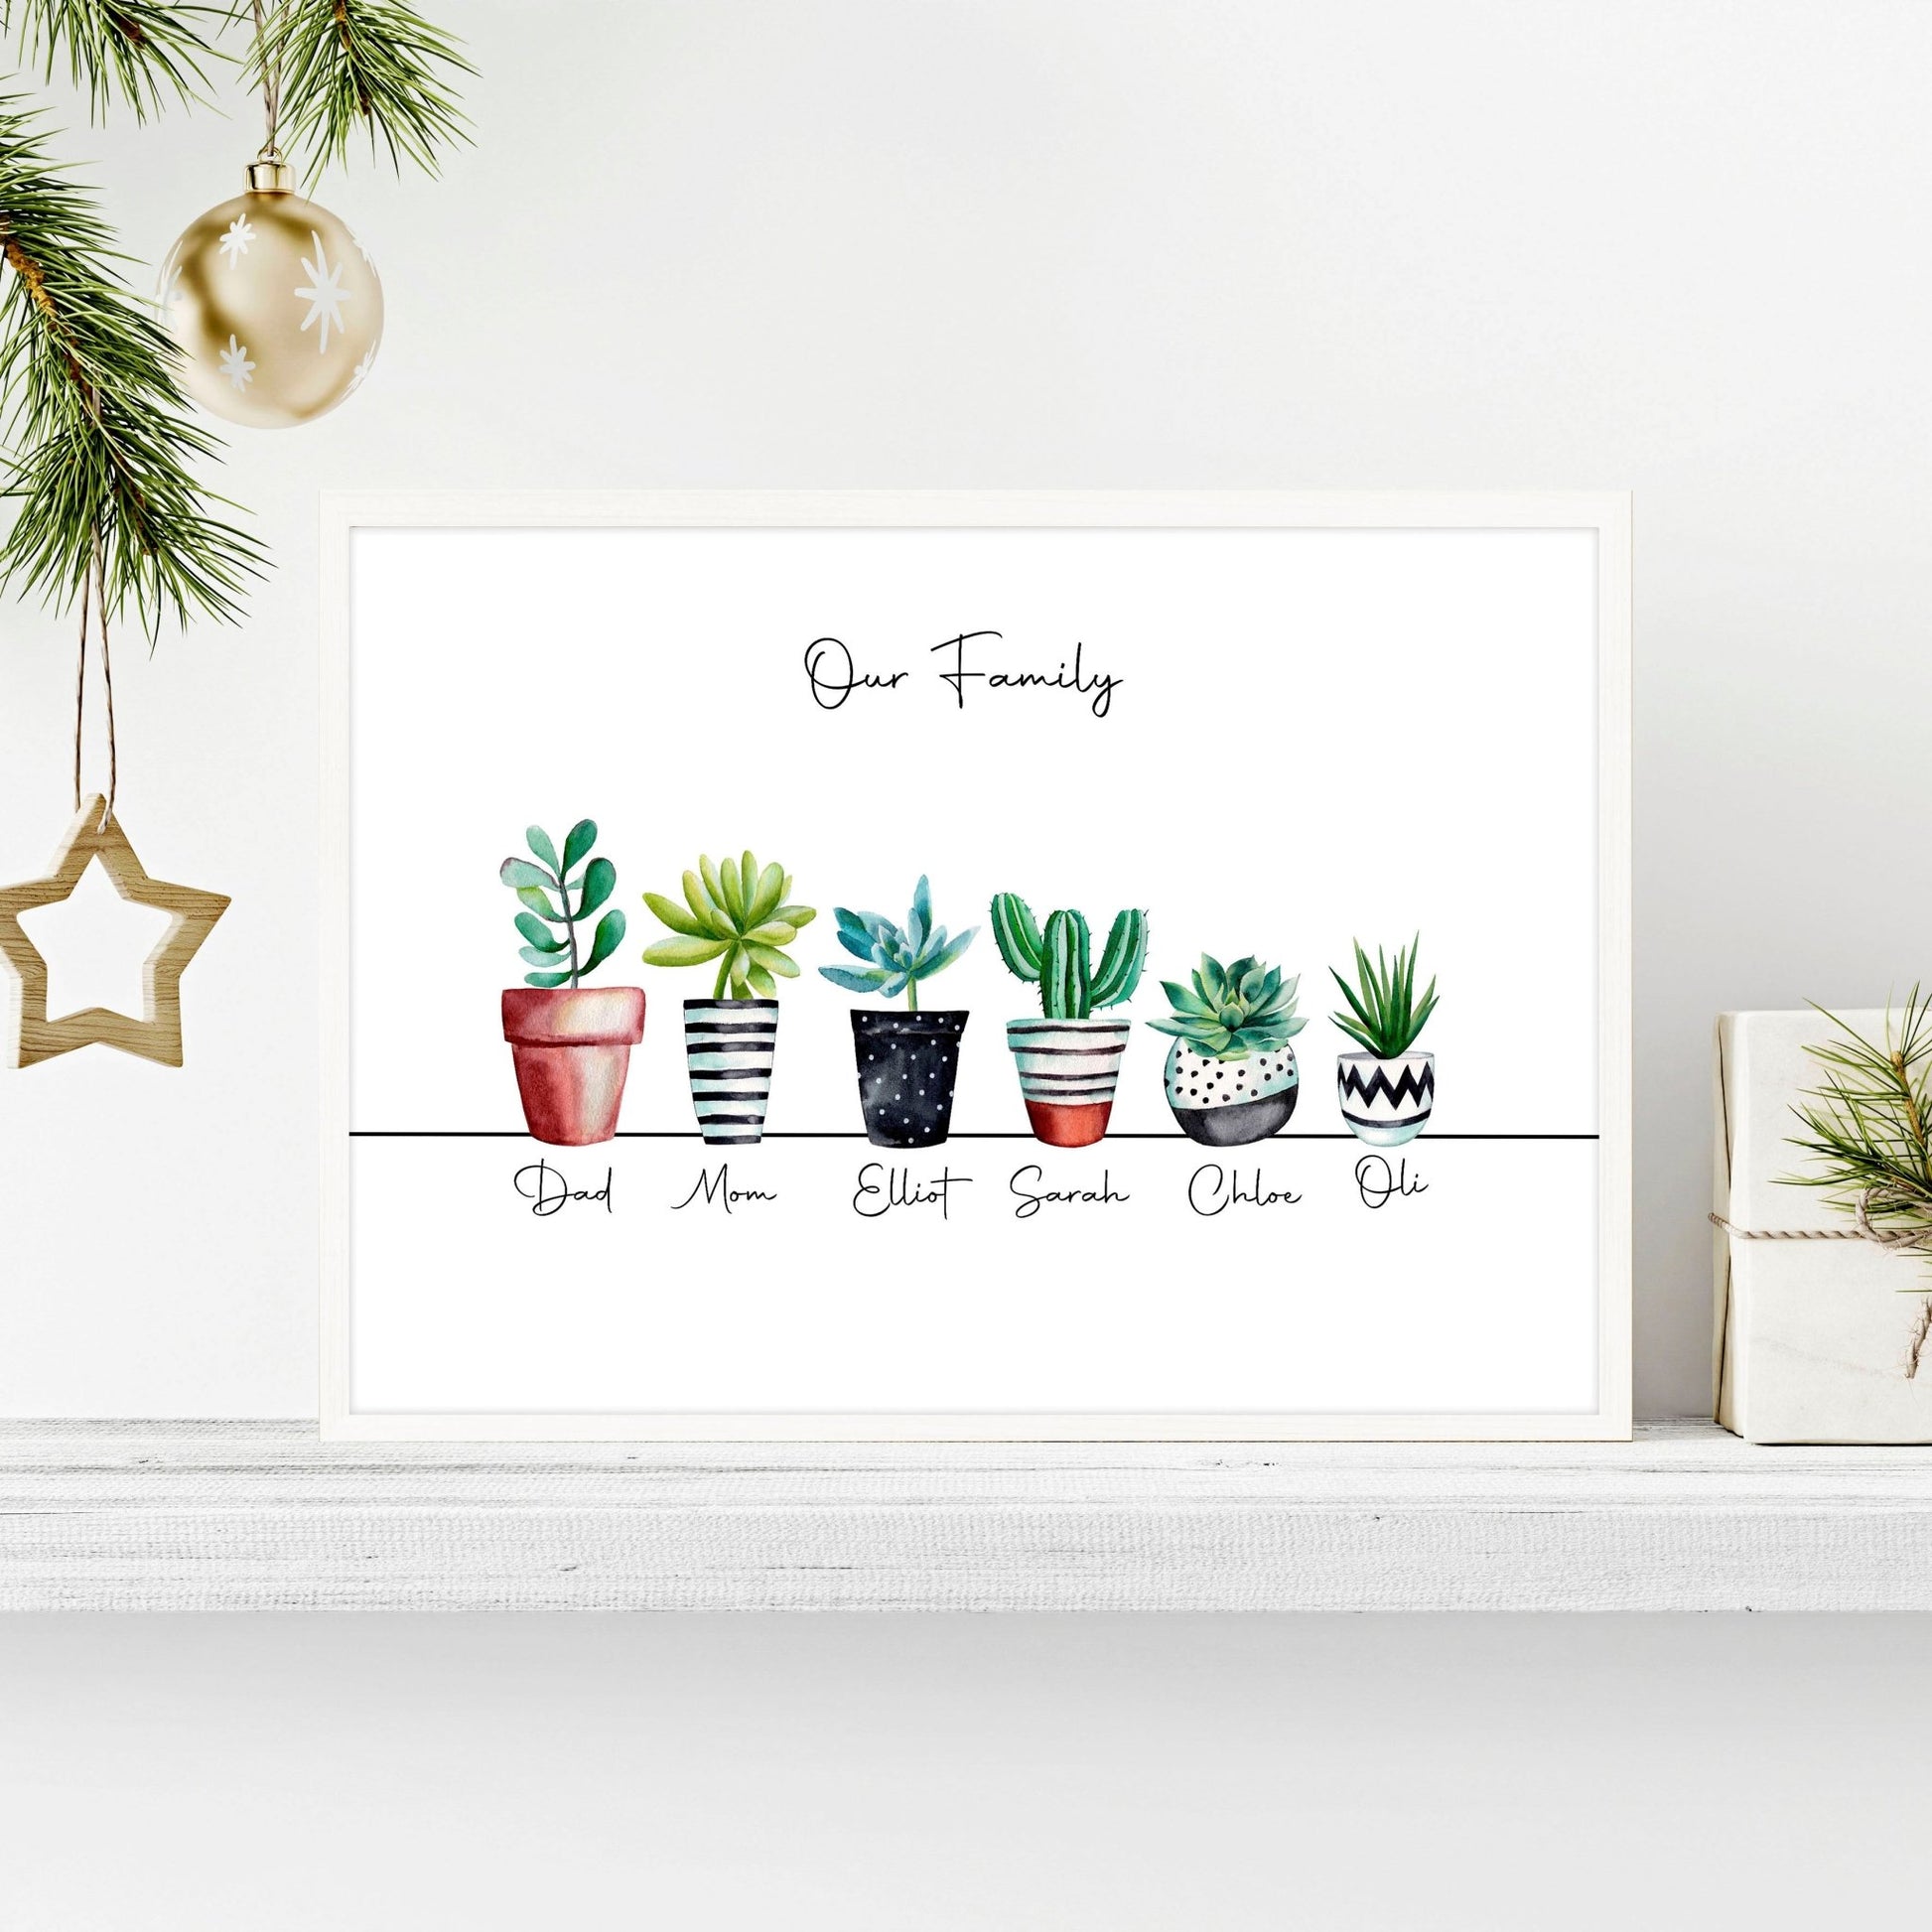 Personalised gifts family tree wall art print